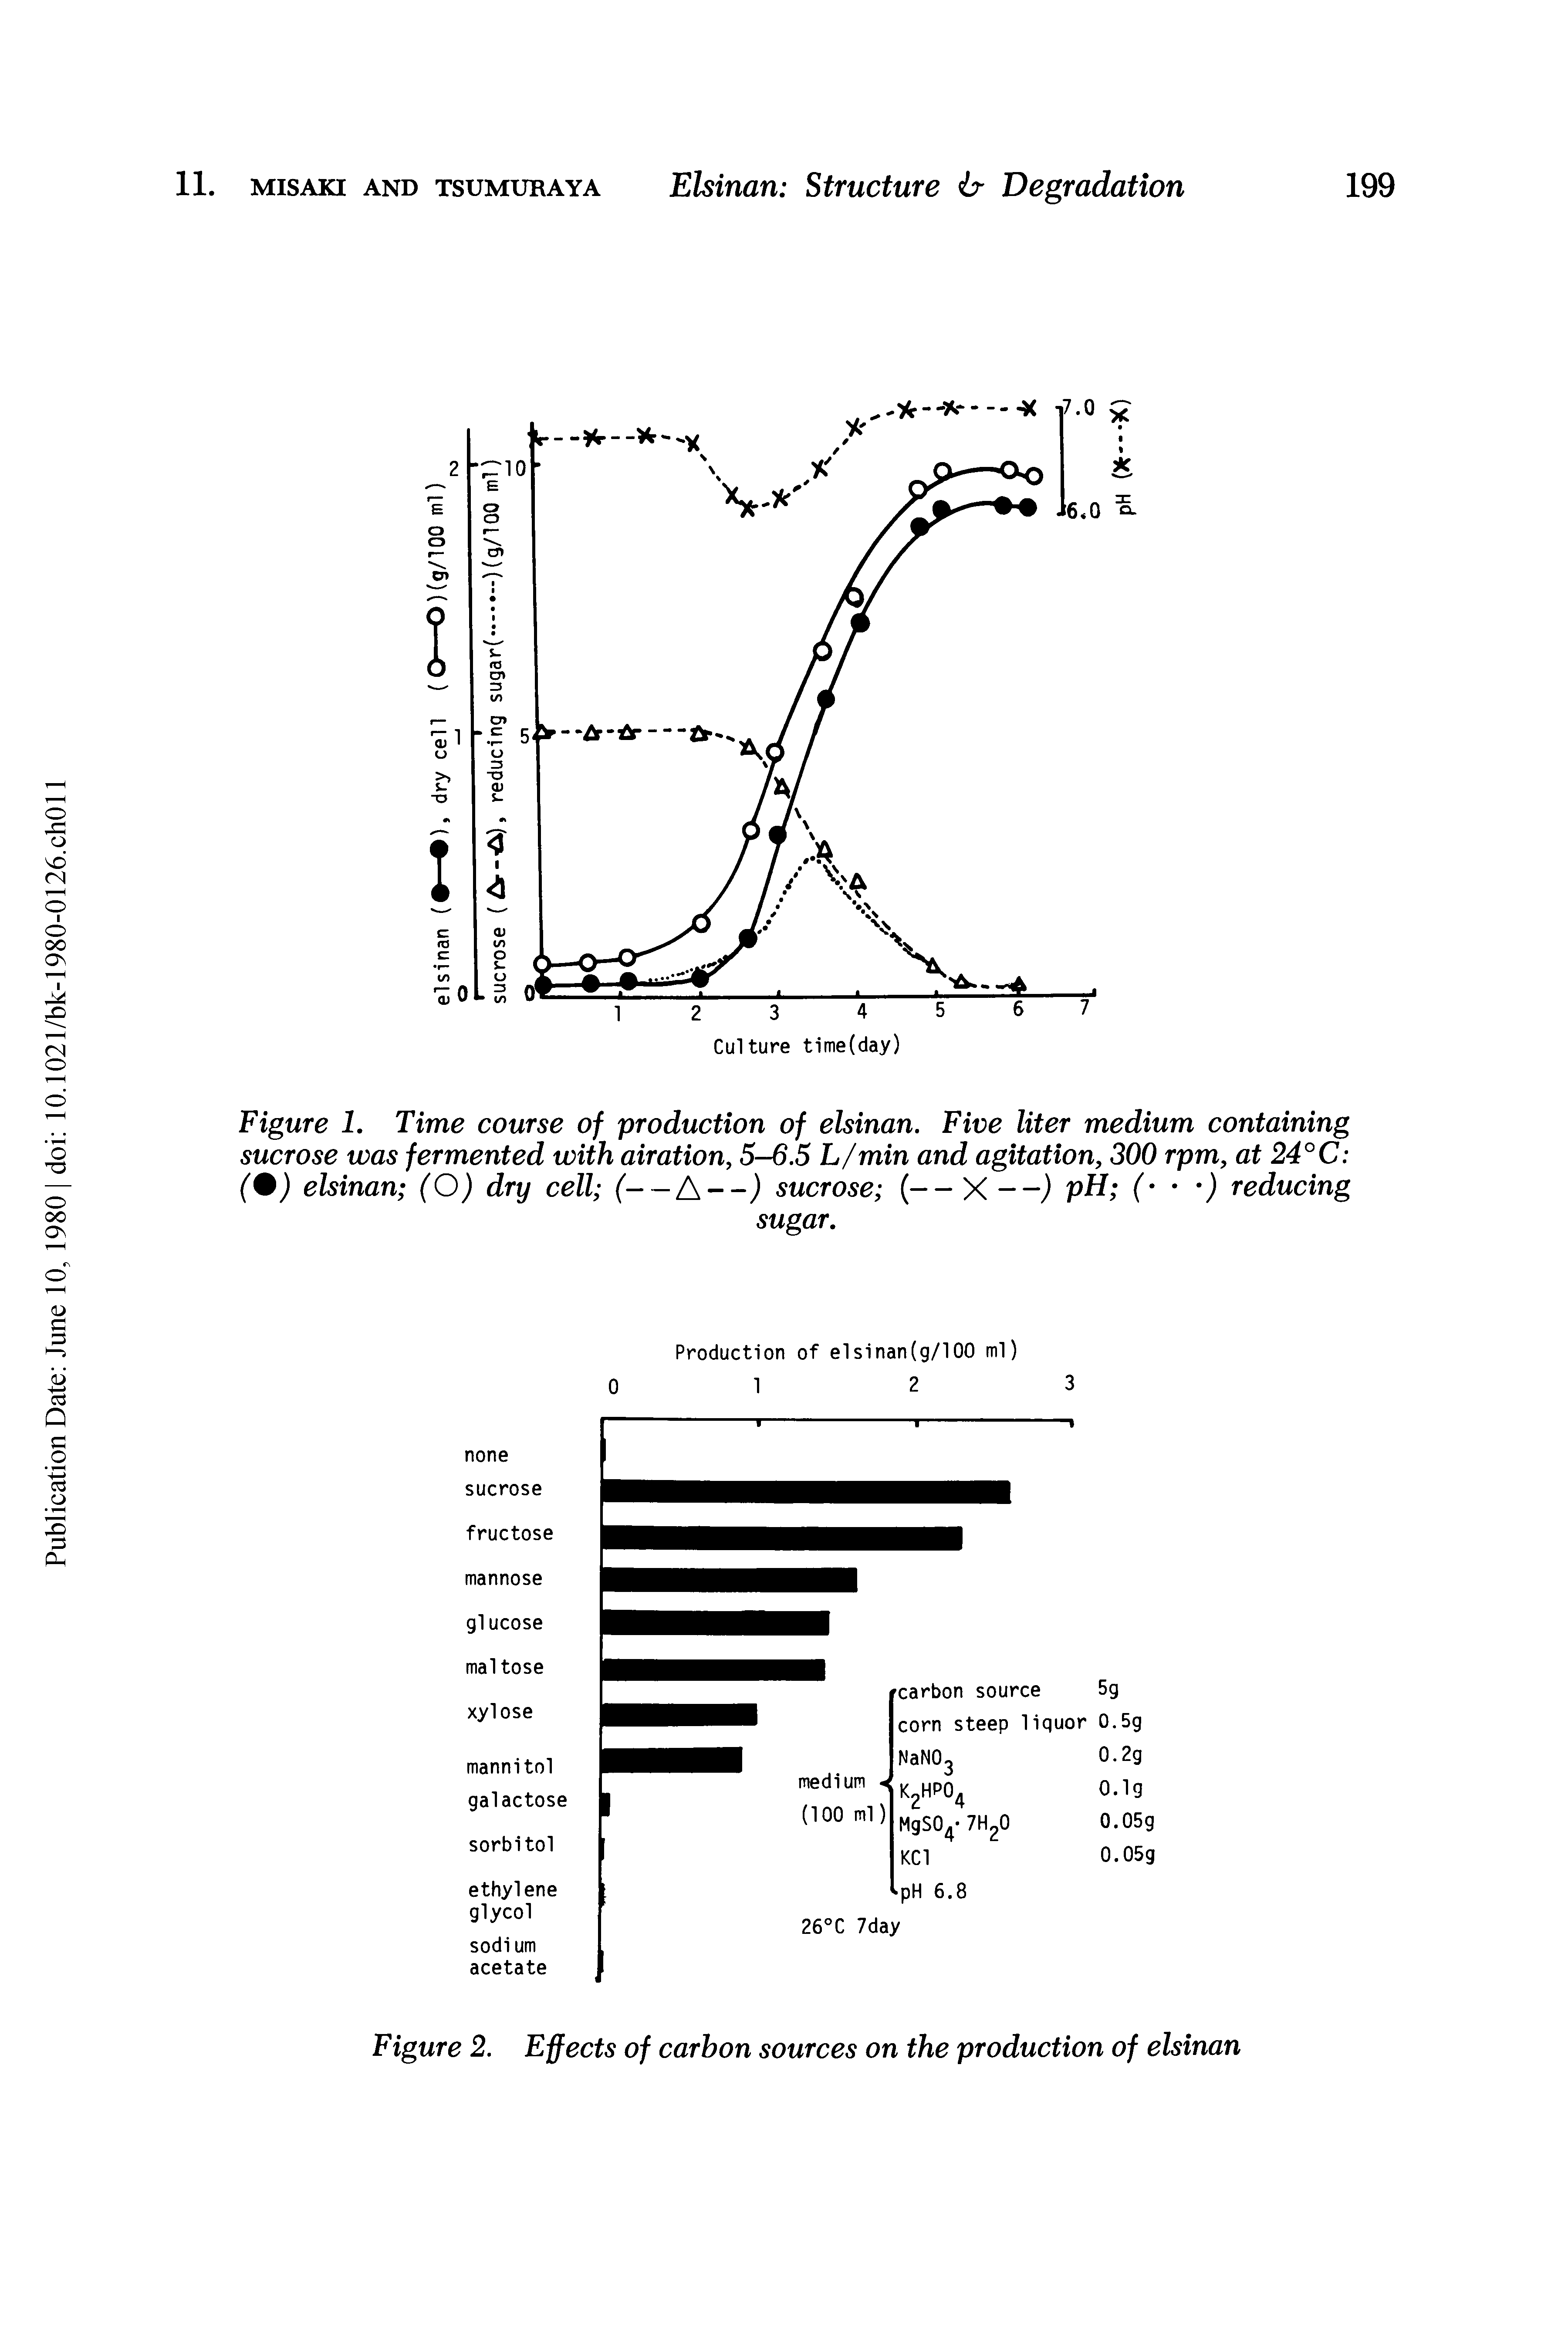 Figure 1. Time course of production of elsinan. Five liter medium containing sucrose was fermented with airation, 5-6.5 L/min and agitation, 300 rpm, at 24°C elsinan (O) dry cell (—A--) sucrose (— X —) pH reducing...